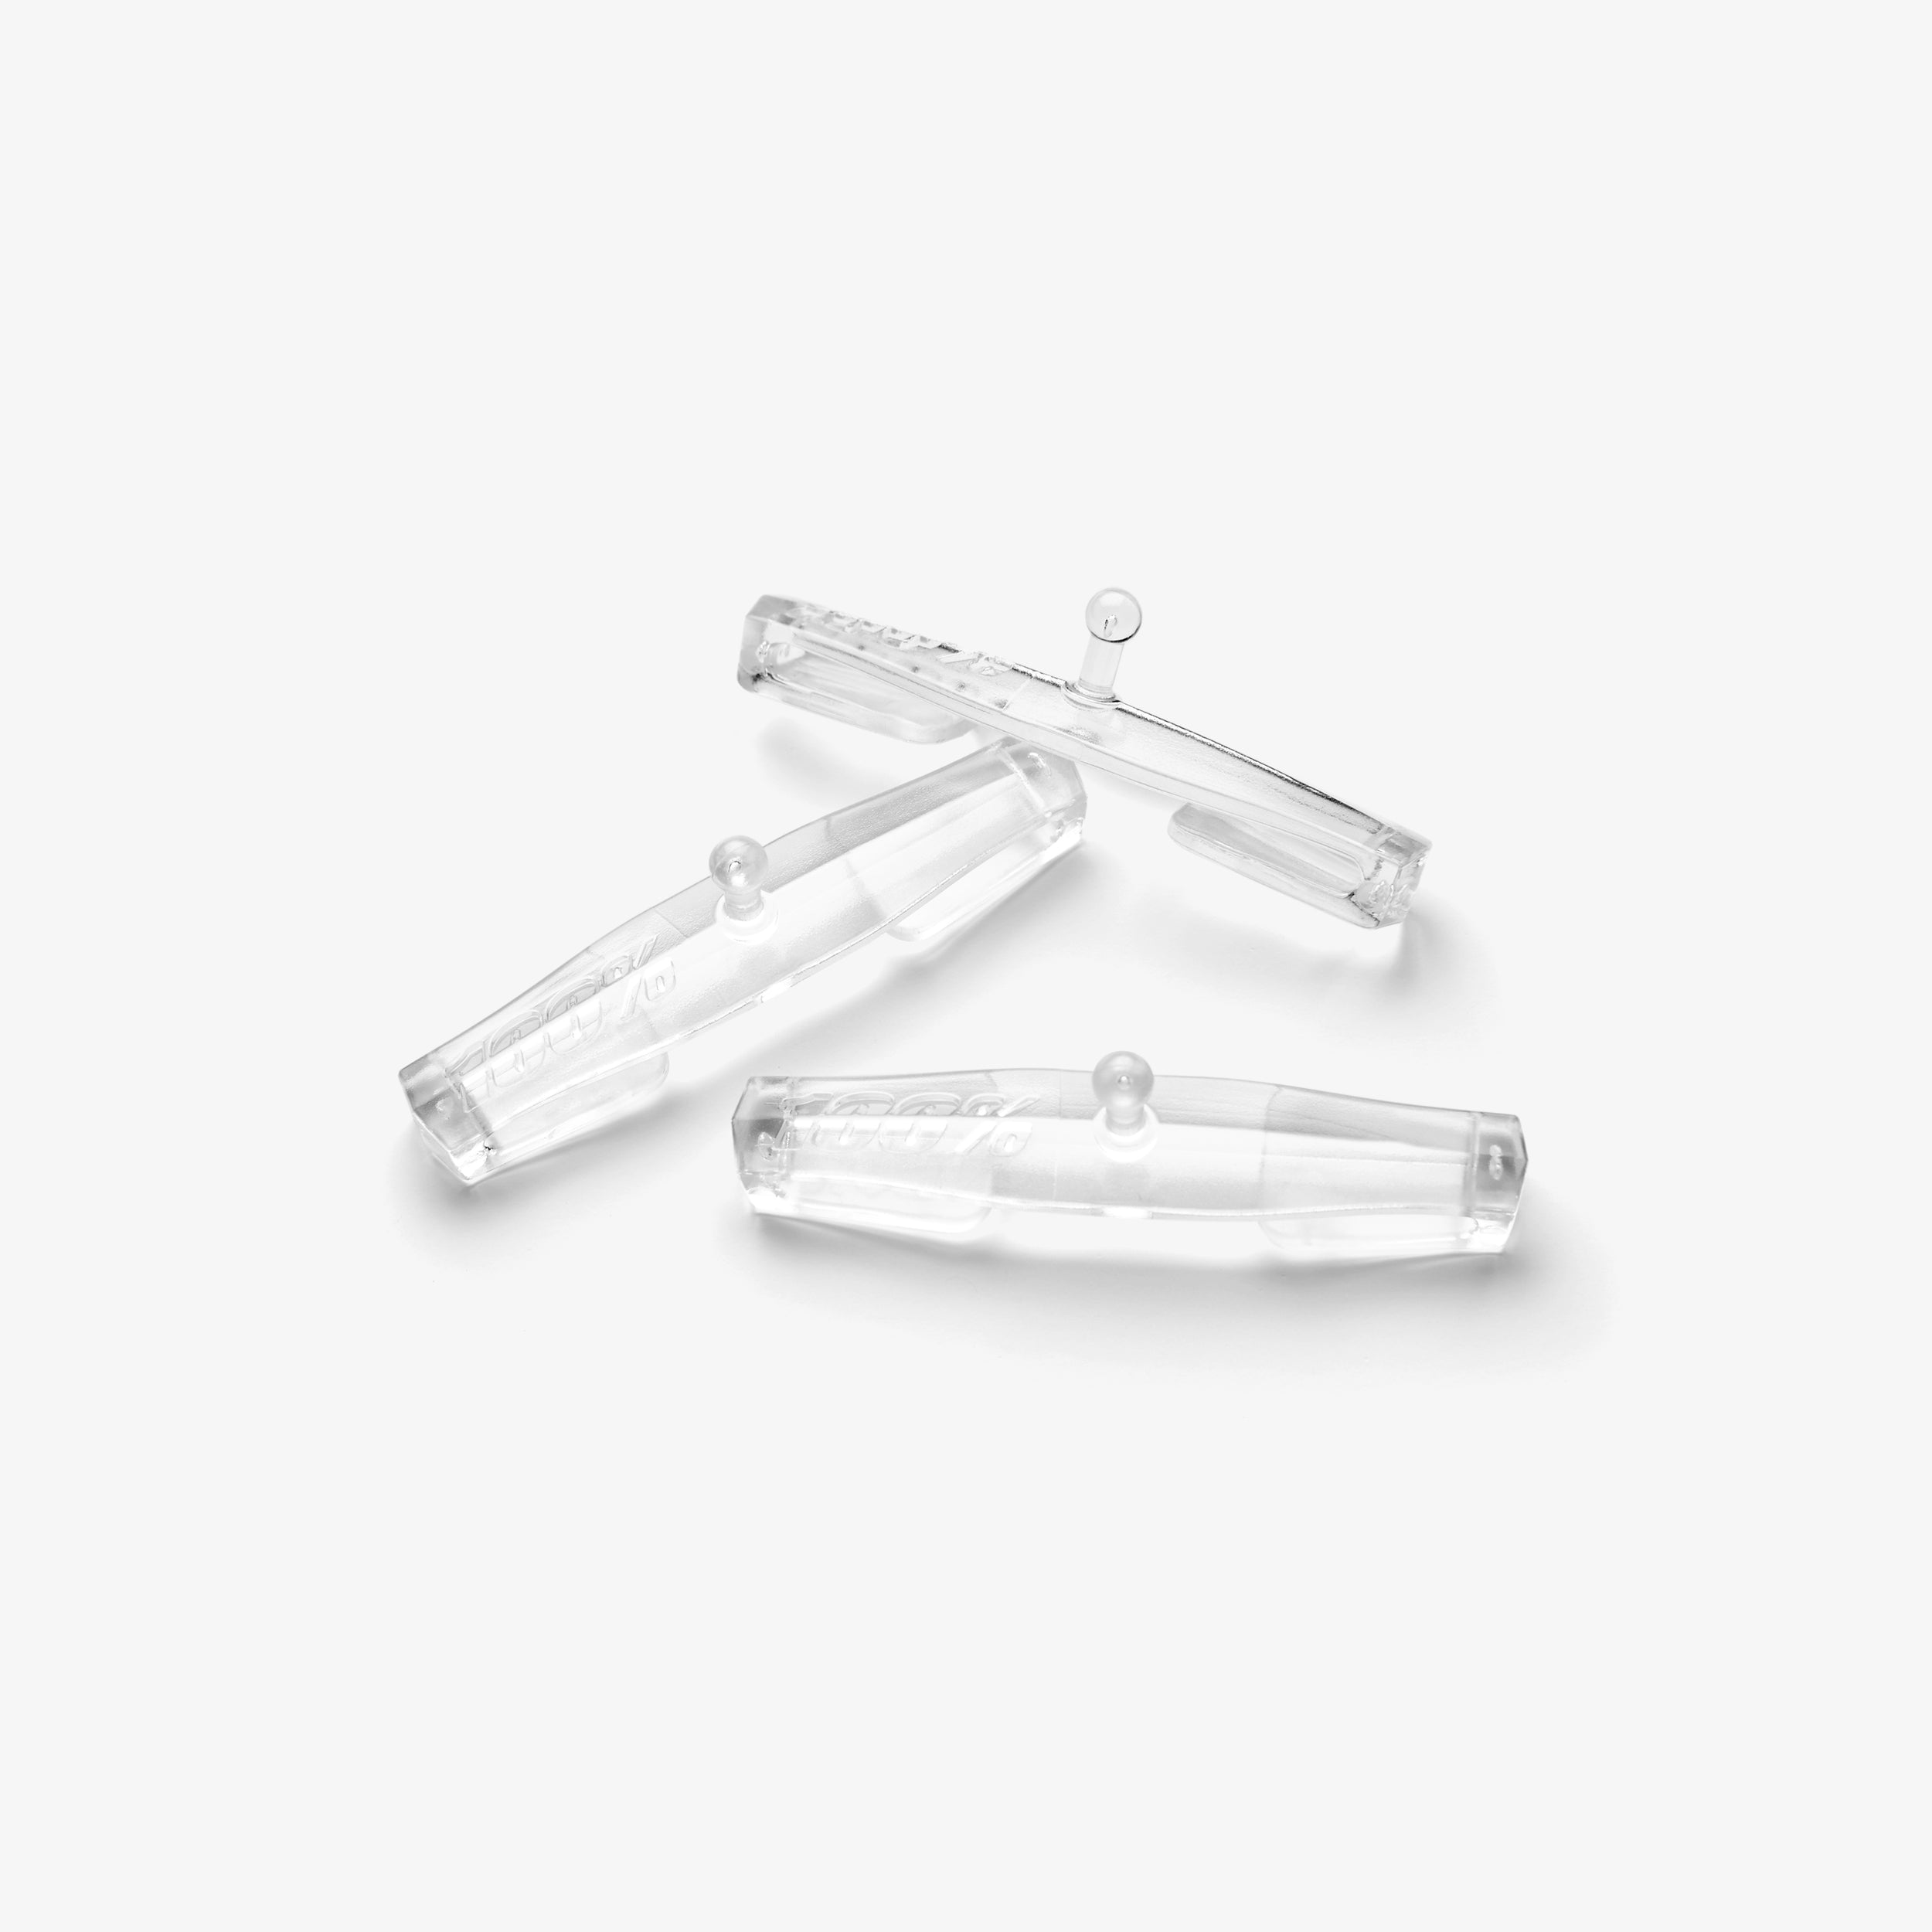 Tear-off Strap Pin - Clear - 3 Pack